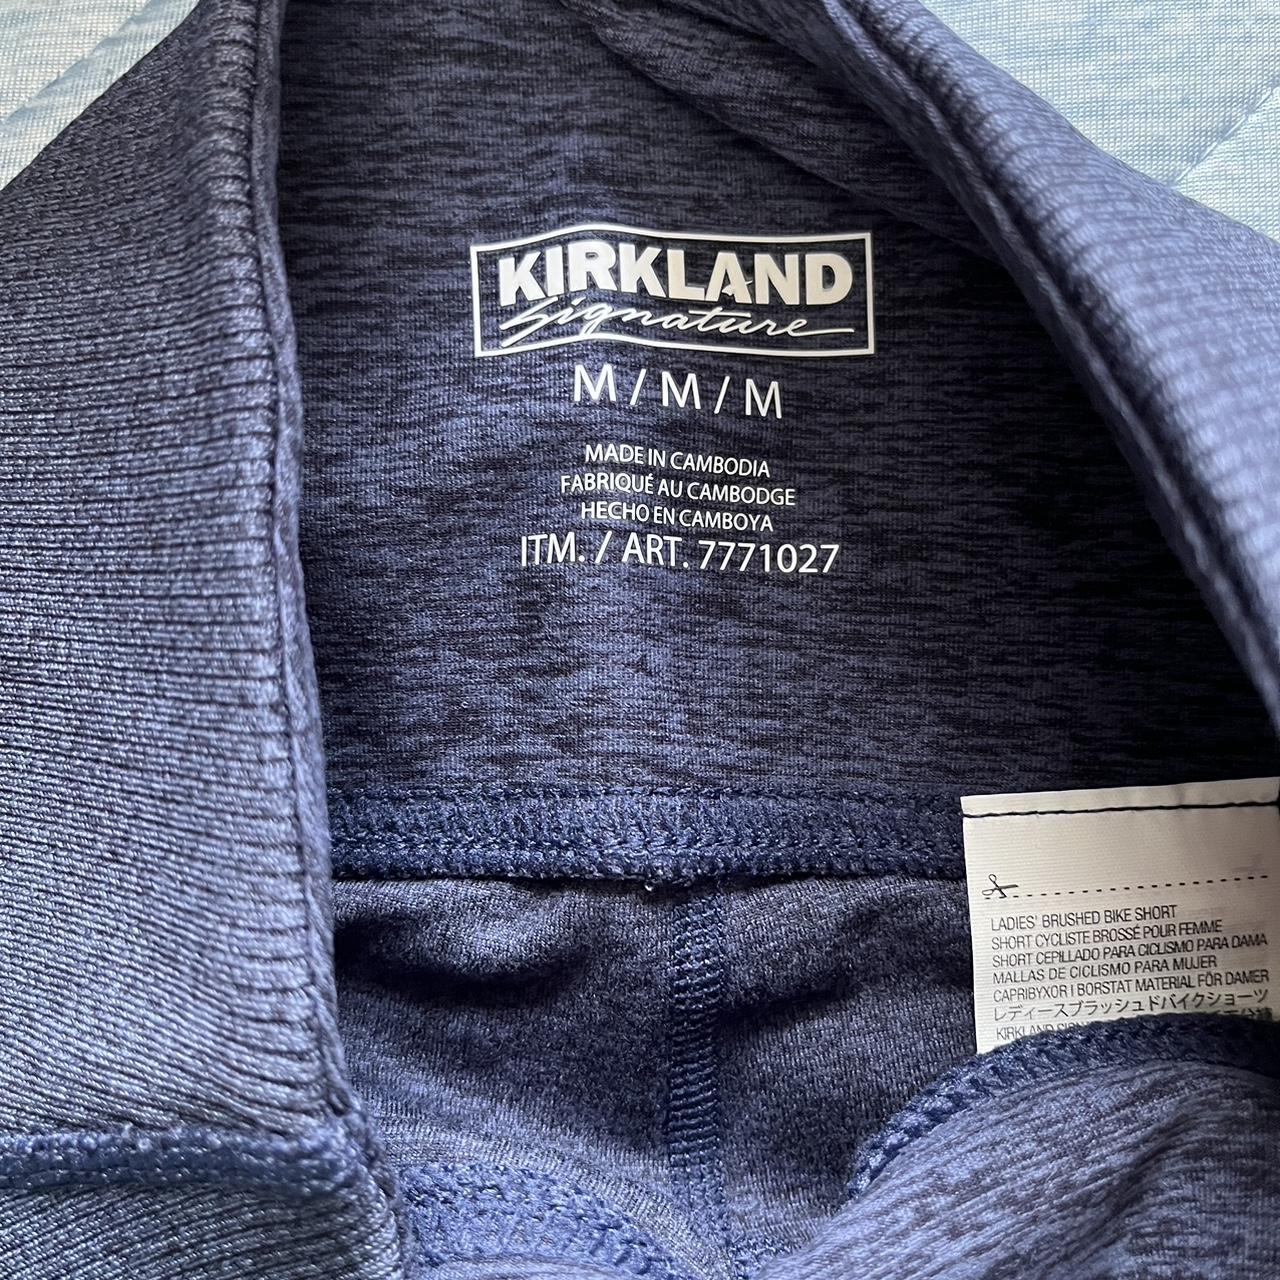 The #kirklandsignature ladies brushed leggings with pockets are